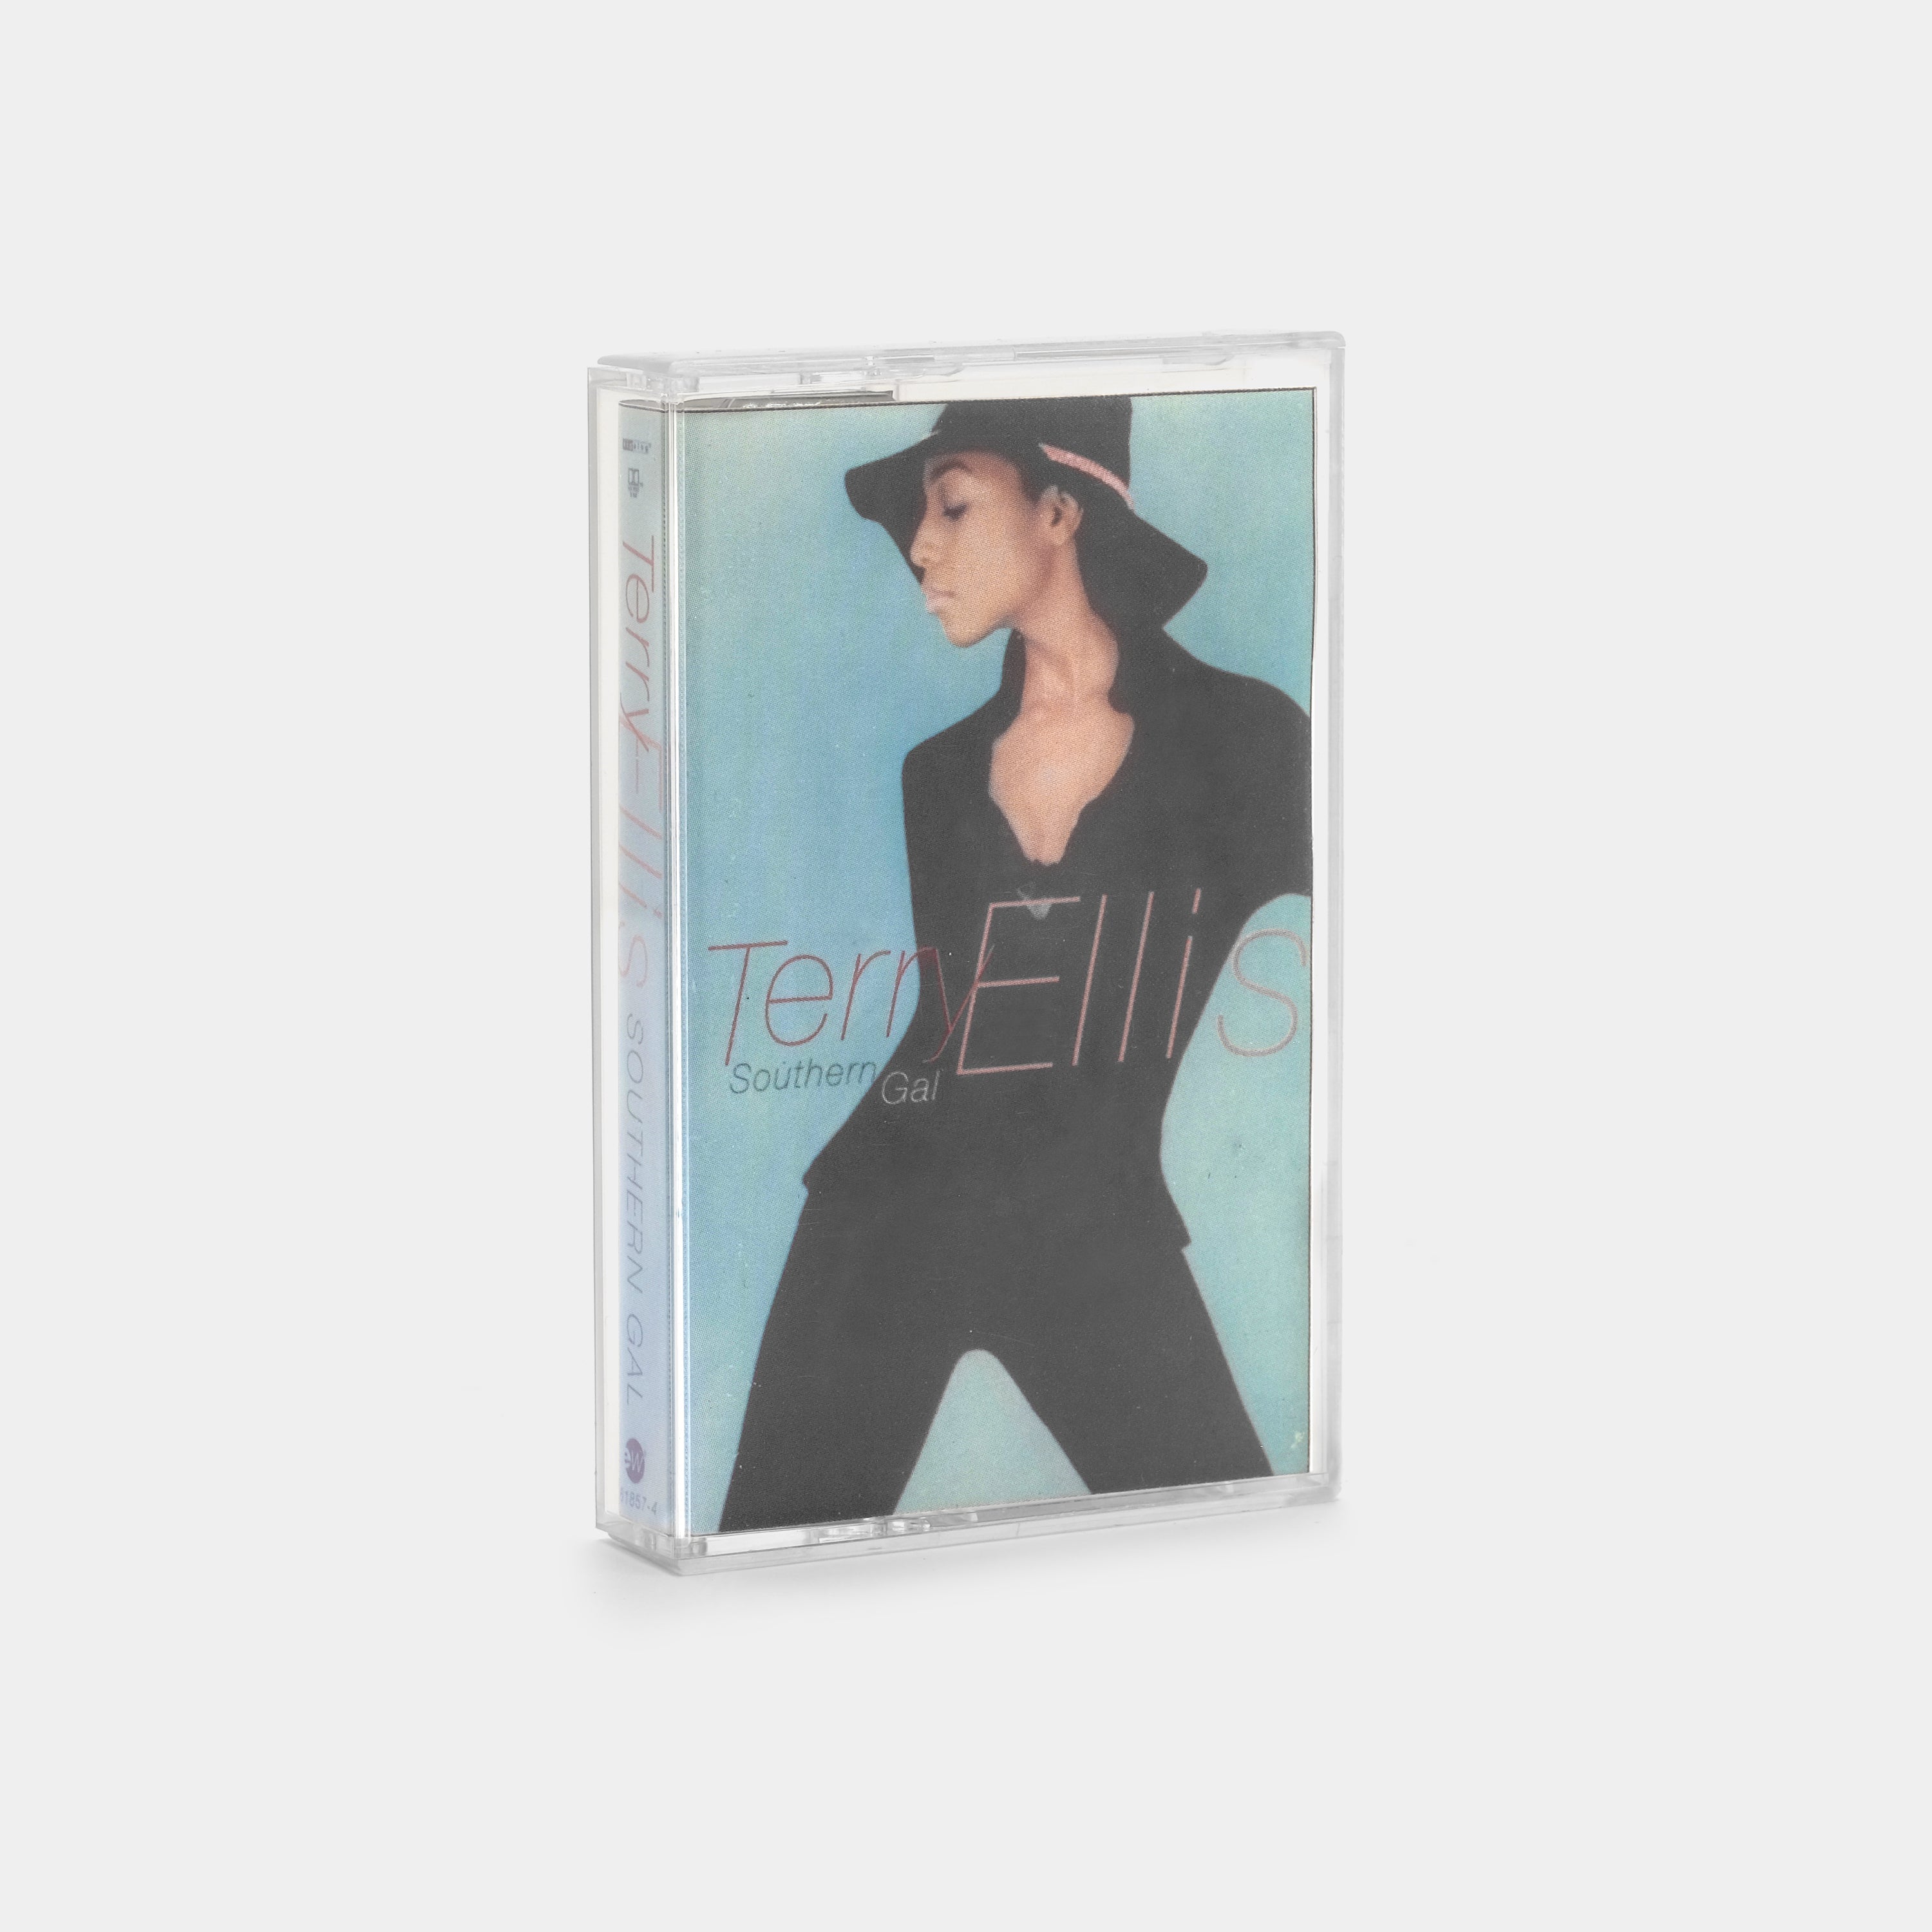 Terry Ellis - Southern Gal Cassette Tape